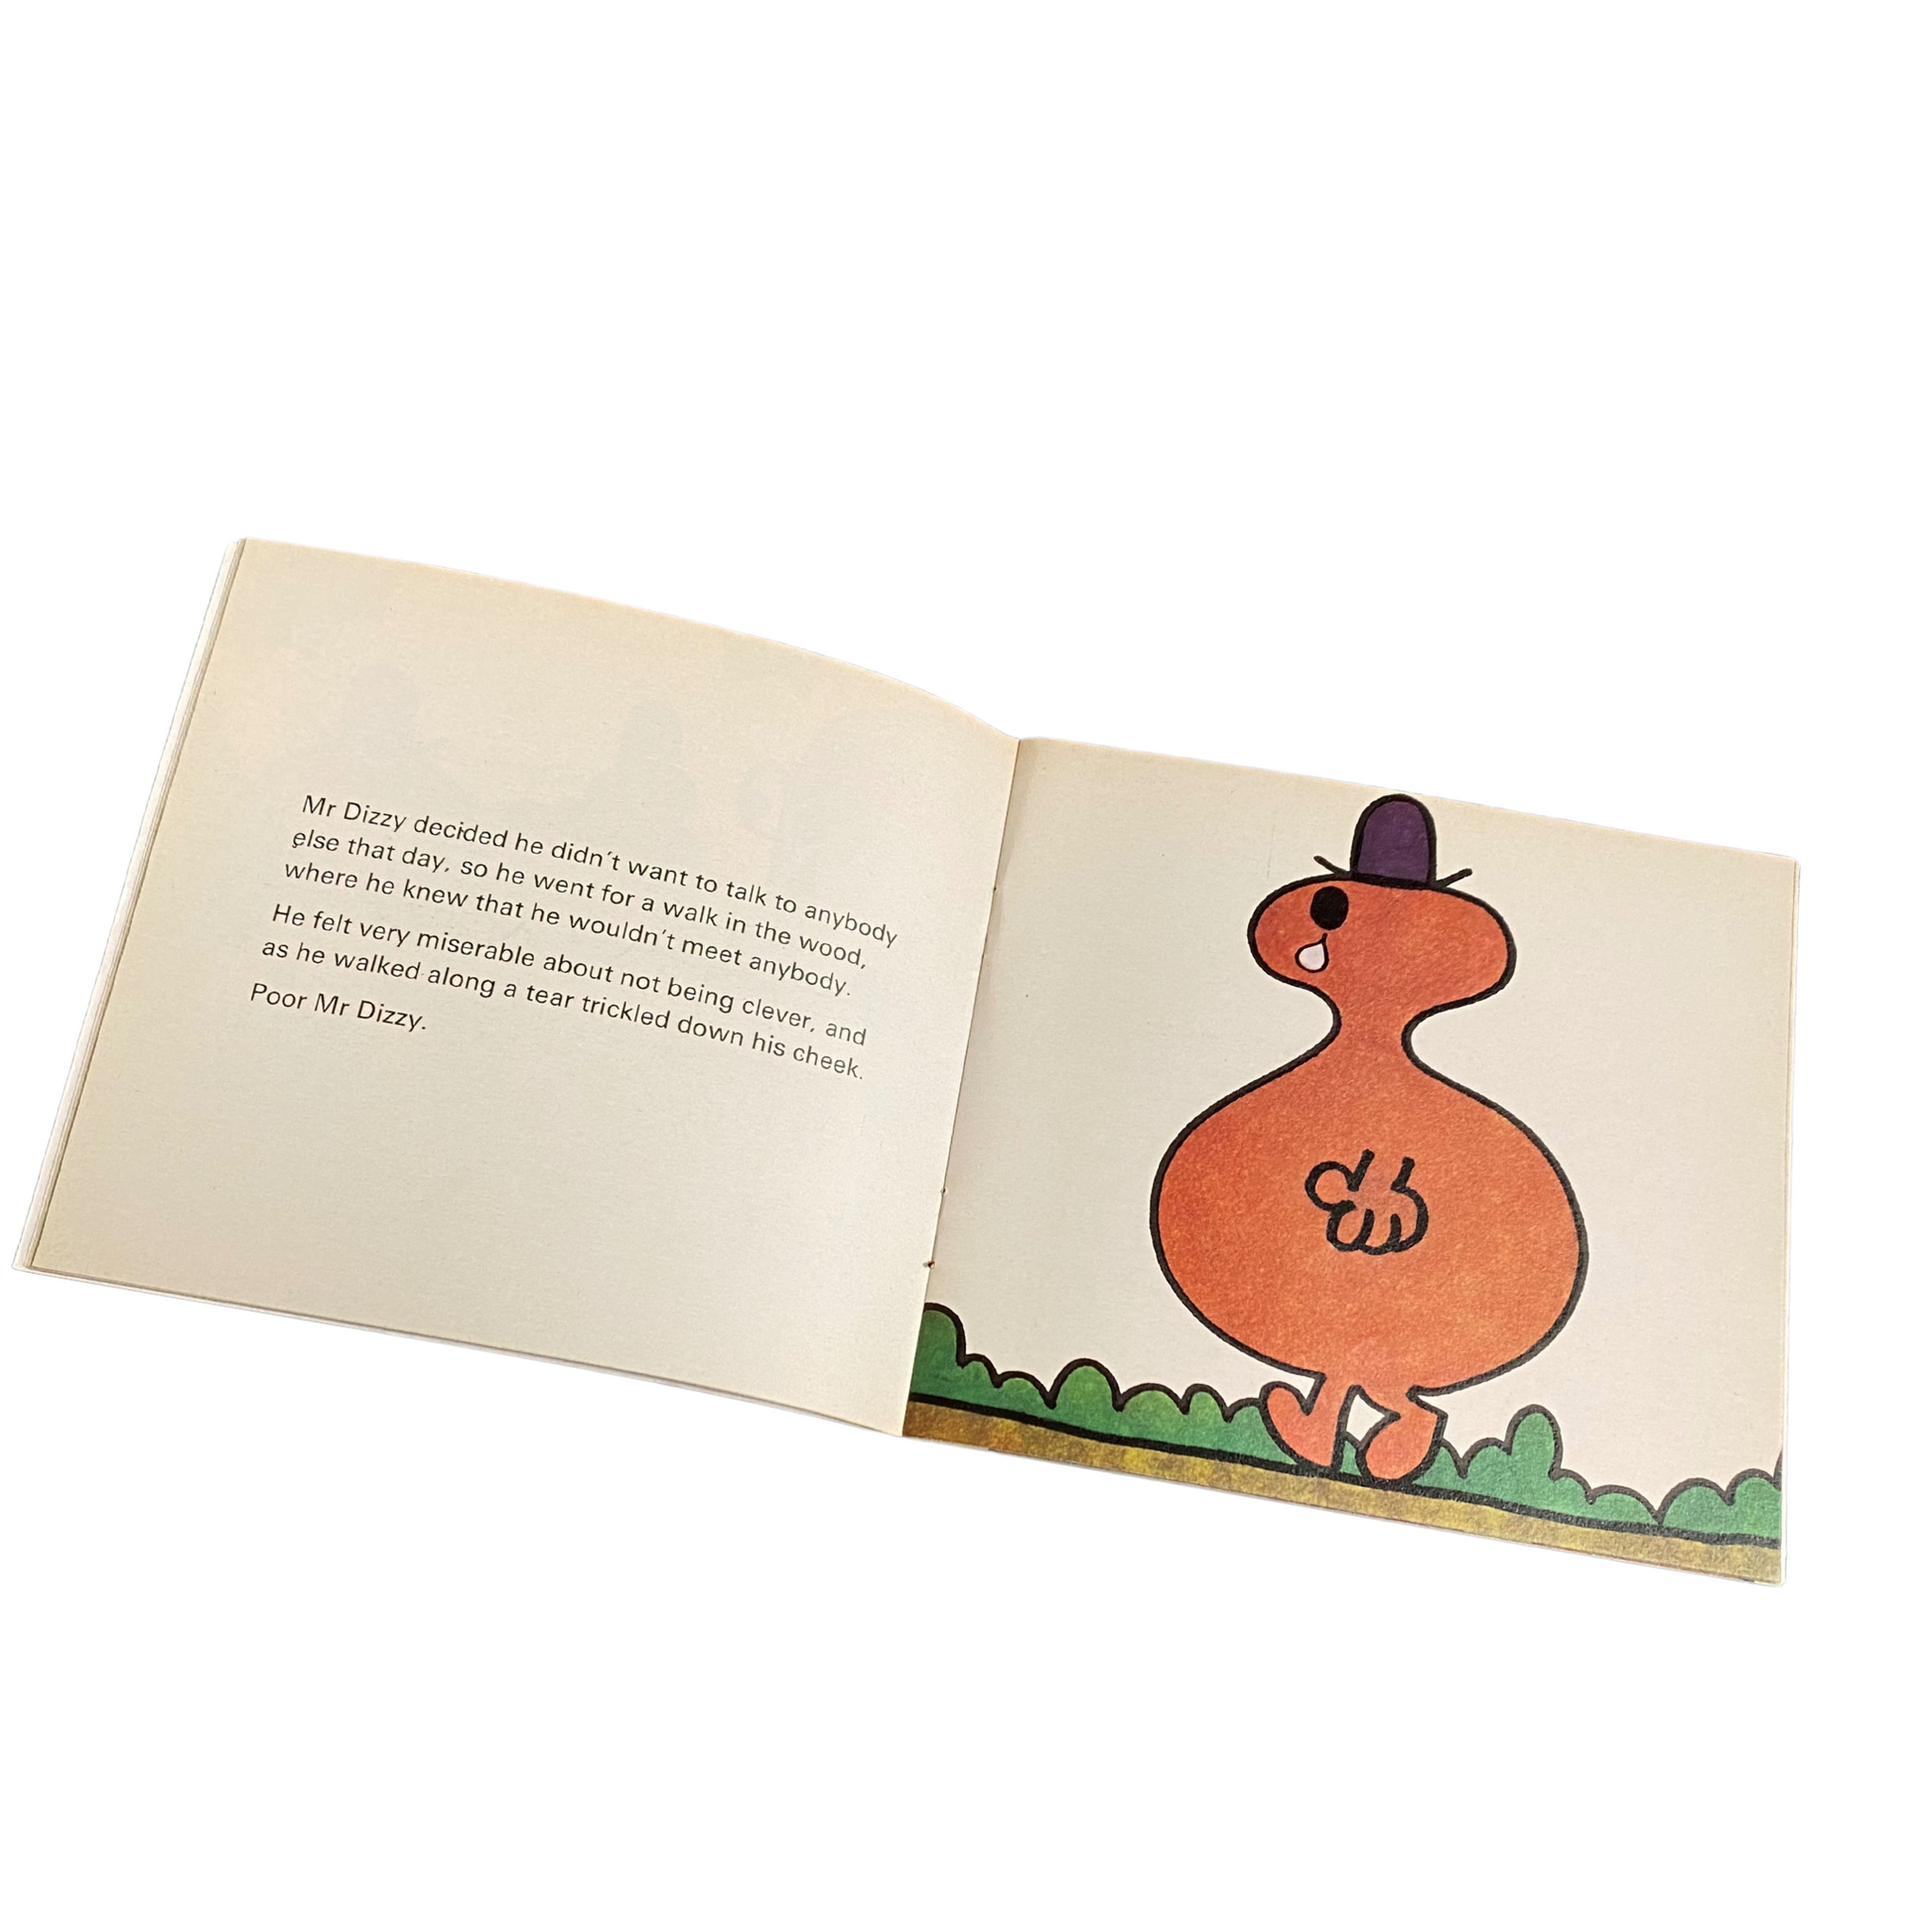 Retro Mr. Men Book -   Mr Dizzy      - 1976  Edition  by Roger Hargreaves